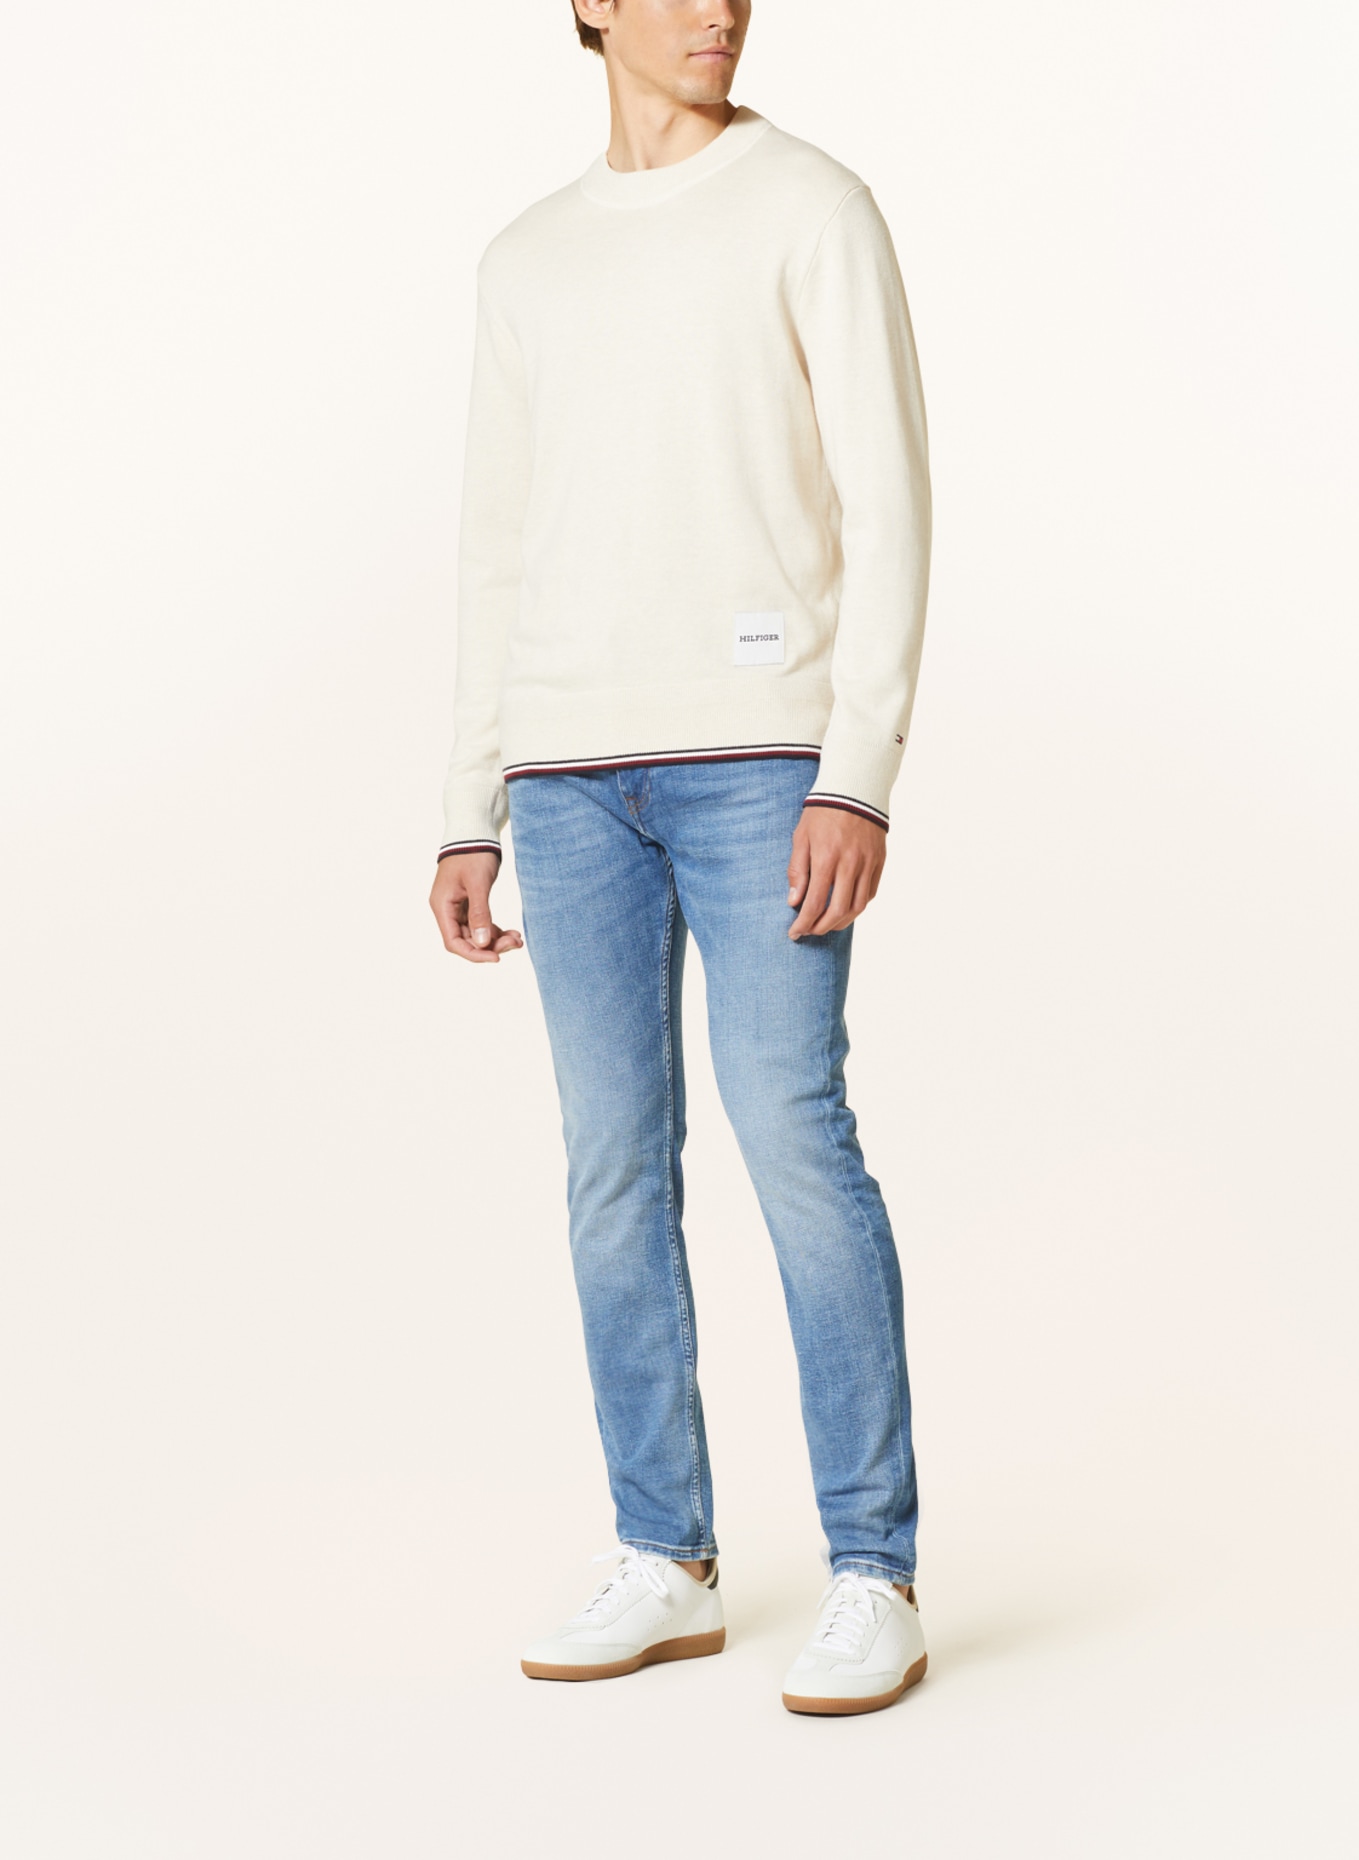 TOMMY HILFIGER Sweater, Color: CREAM (Image 2)